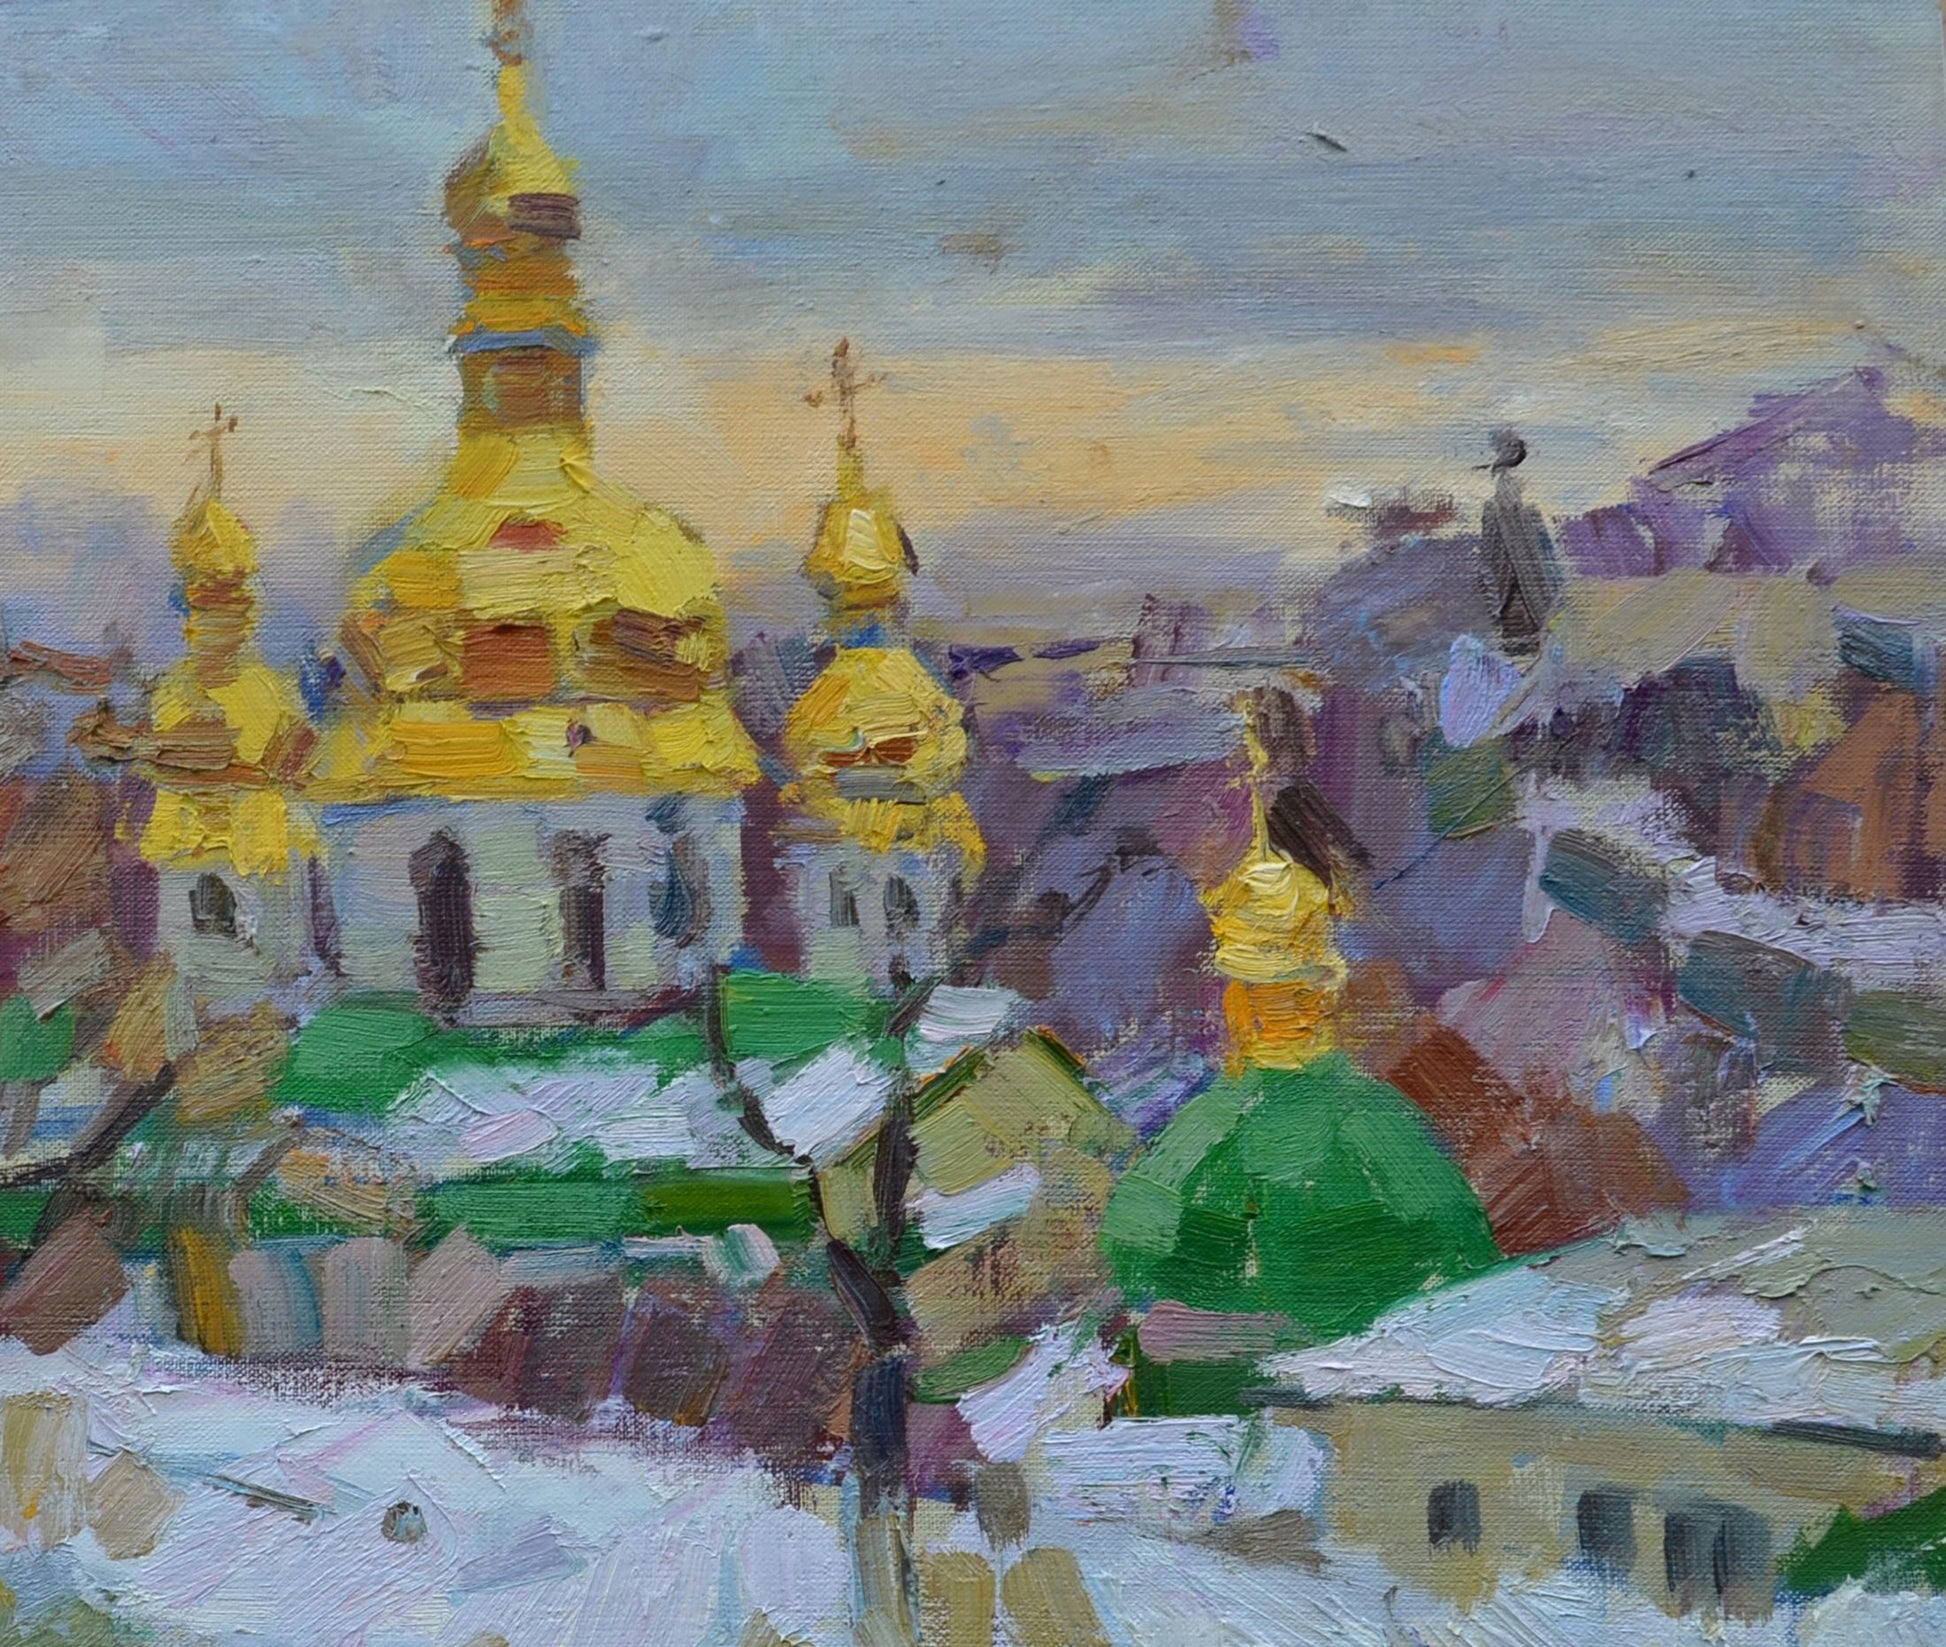 Oil painting depicting "Winter in the Lavra" by Vyacheslav Pereta